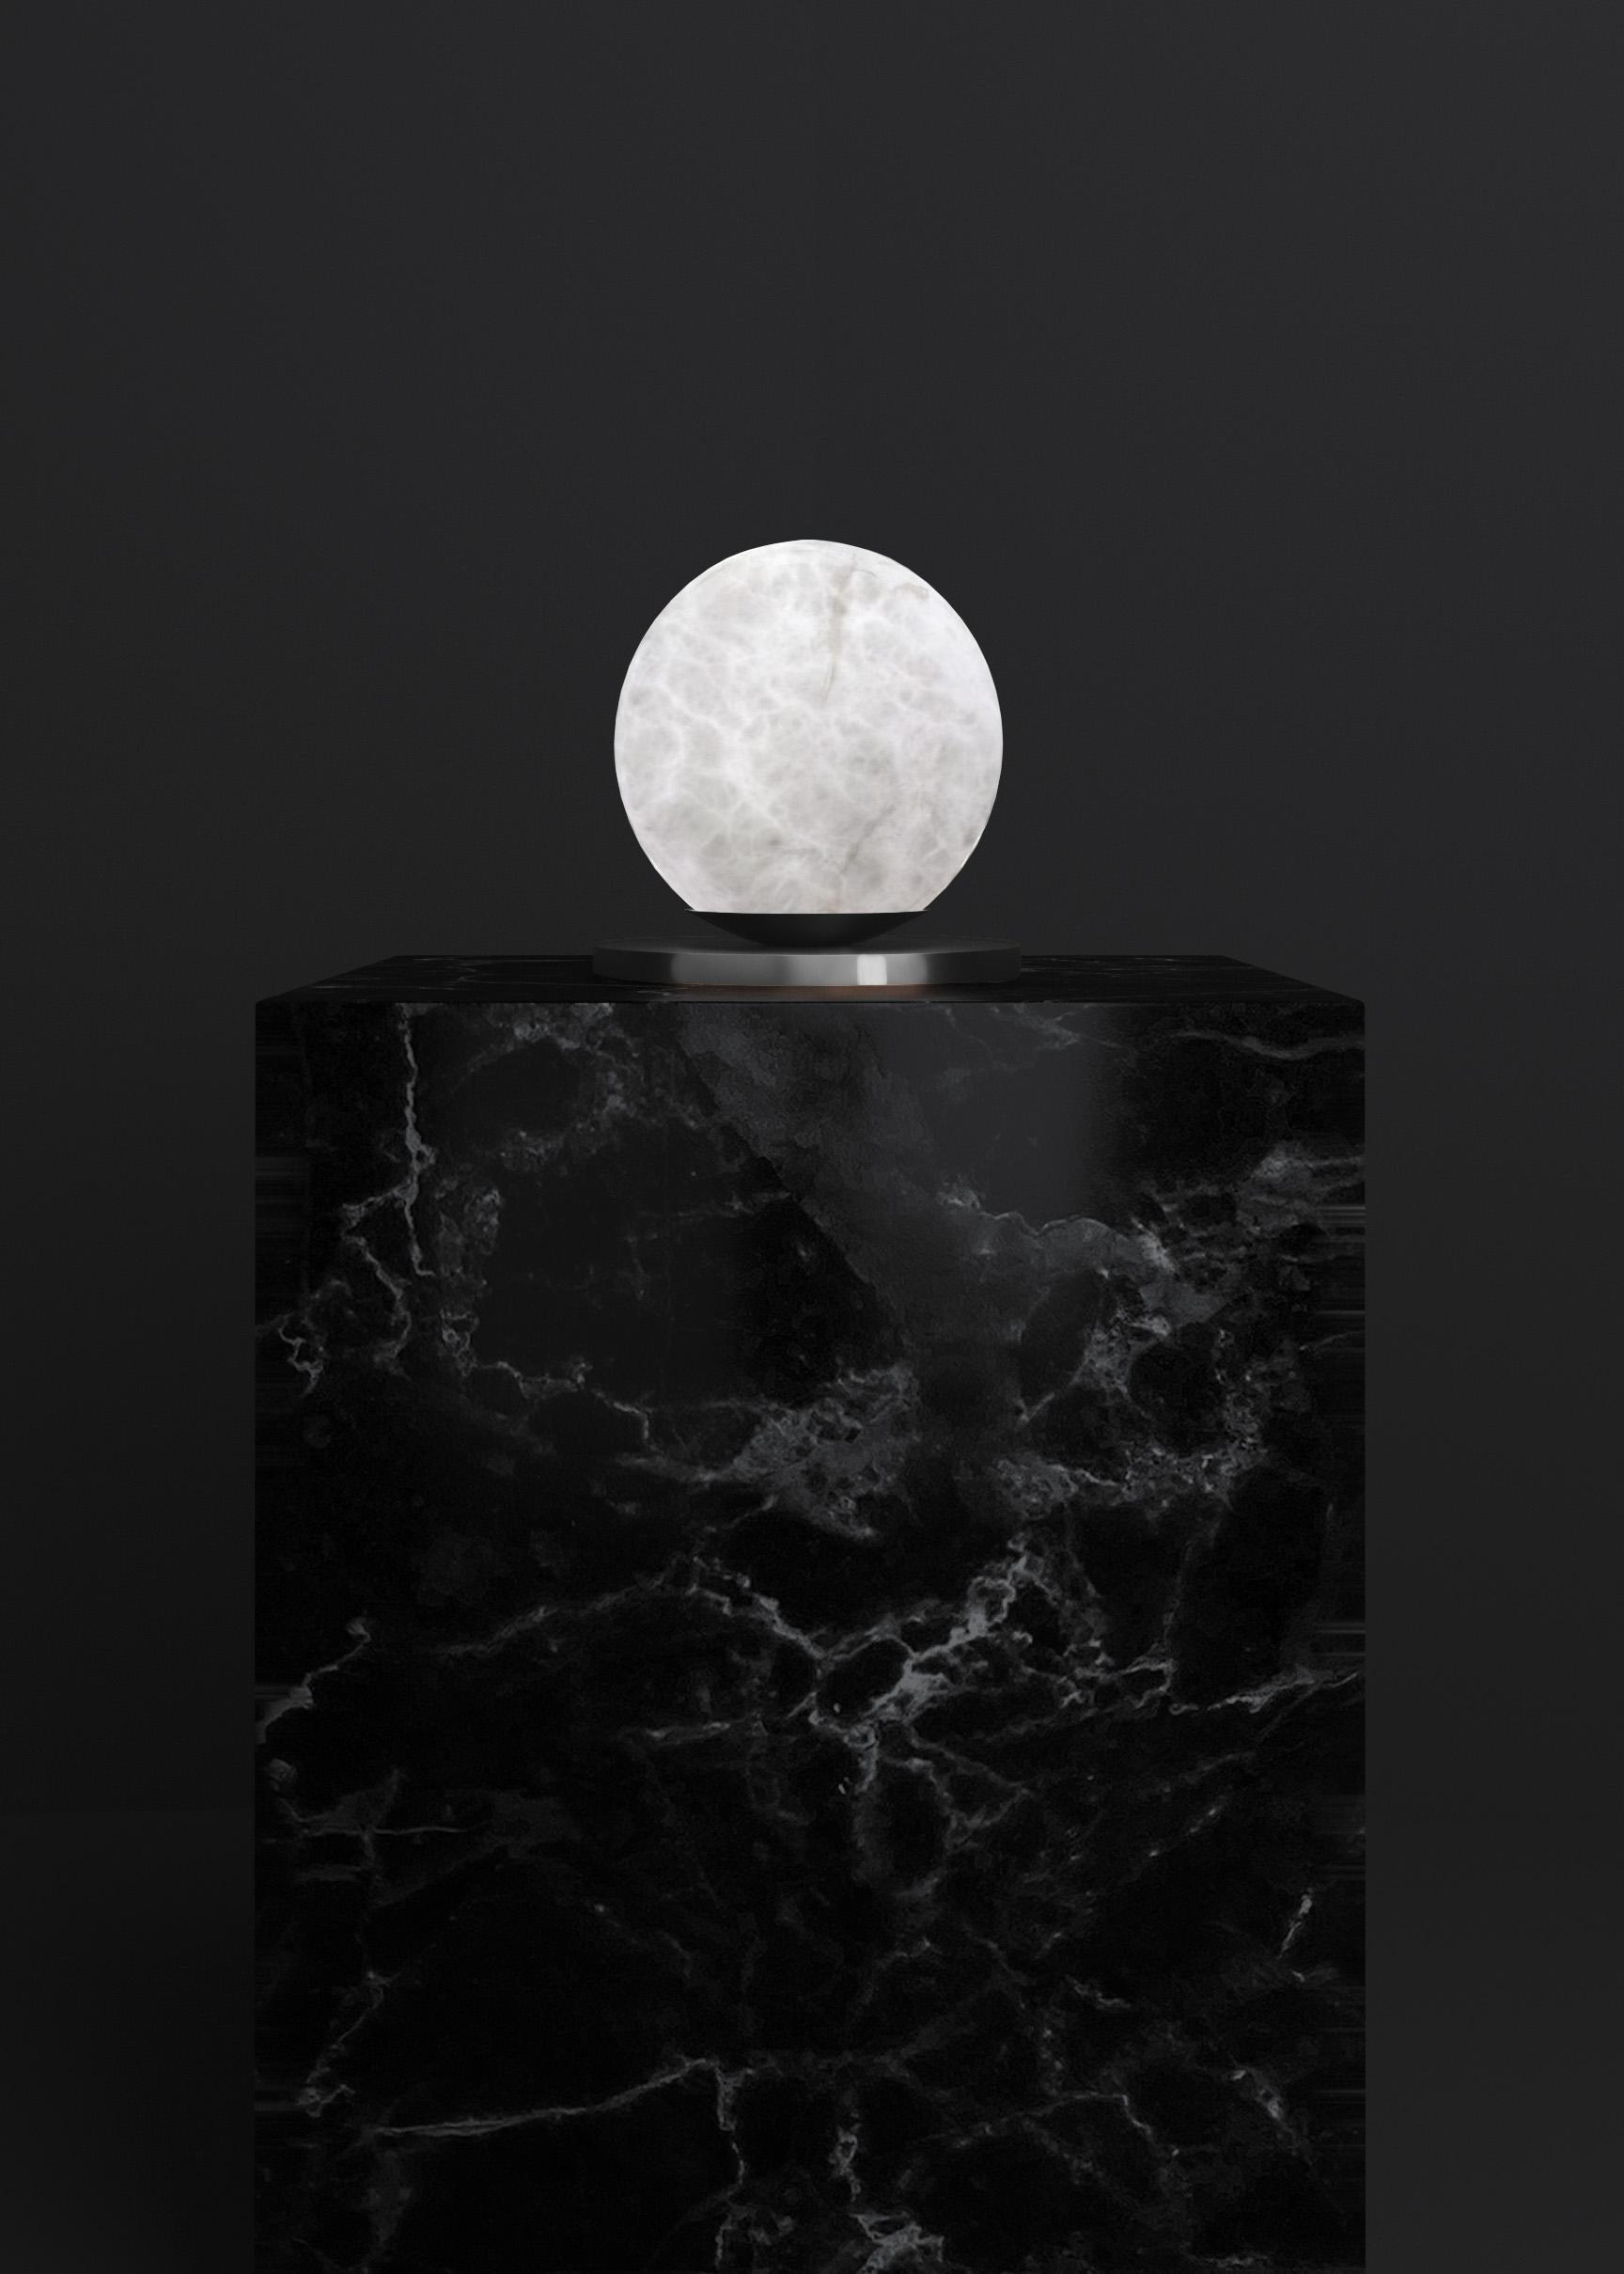 Ofione Shiny Black Metal Table Lamp by Alabastro Italiano
Dimensions: D 16 x W 16 x H 16 cm.
Materials: White alabaster and metal.

Available in different finishes: Shiny Silver, Bronze, Brushed Brass, Ruggine of Florence, Brushed Burnished, Shiny